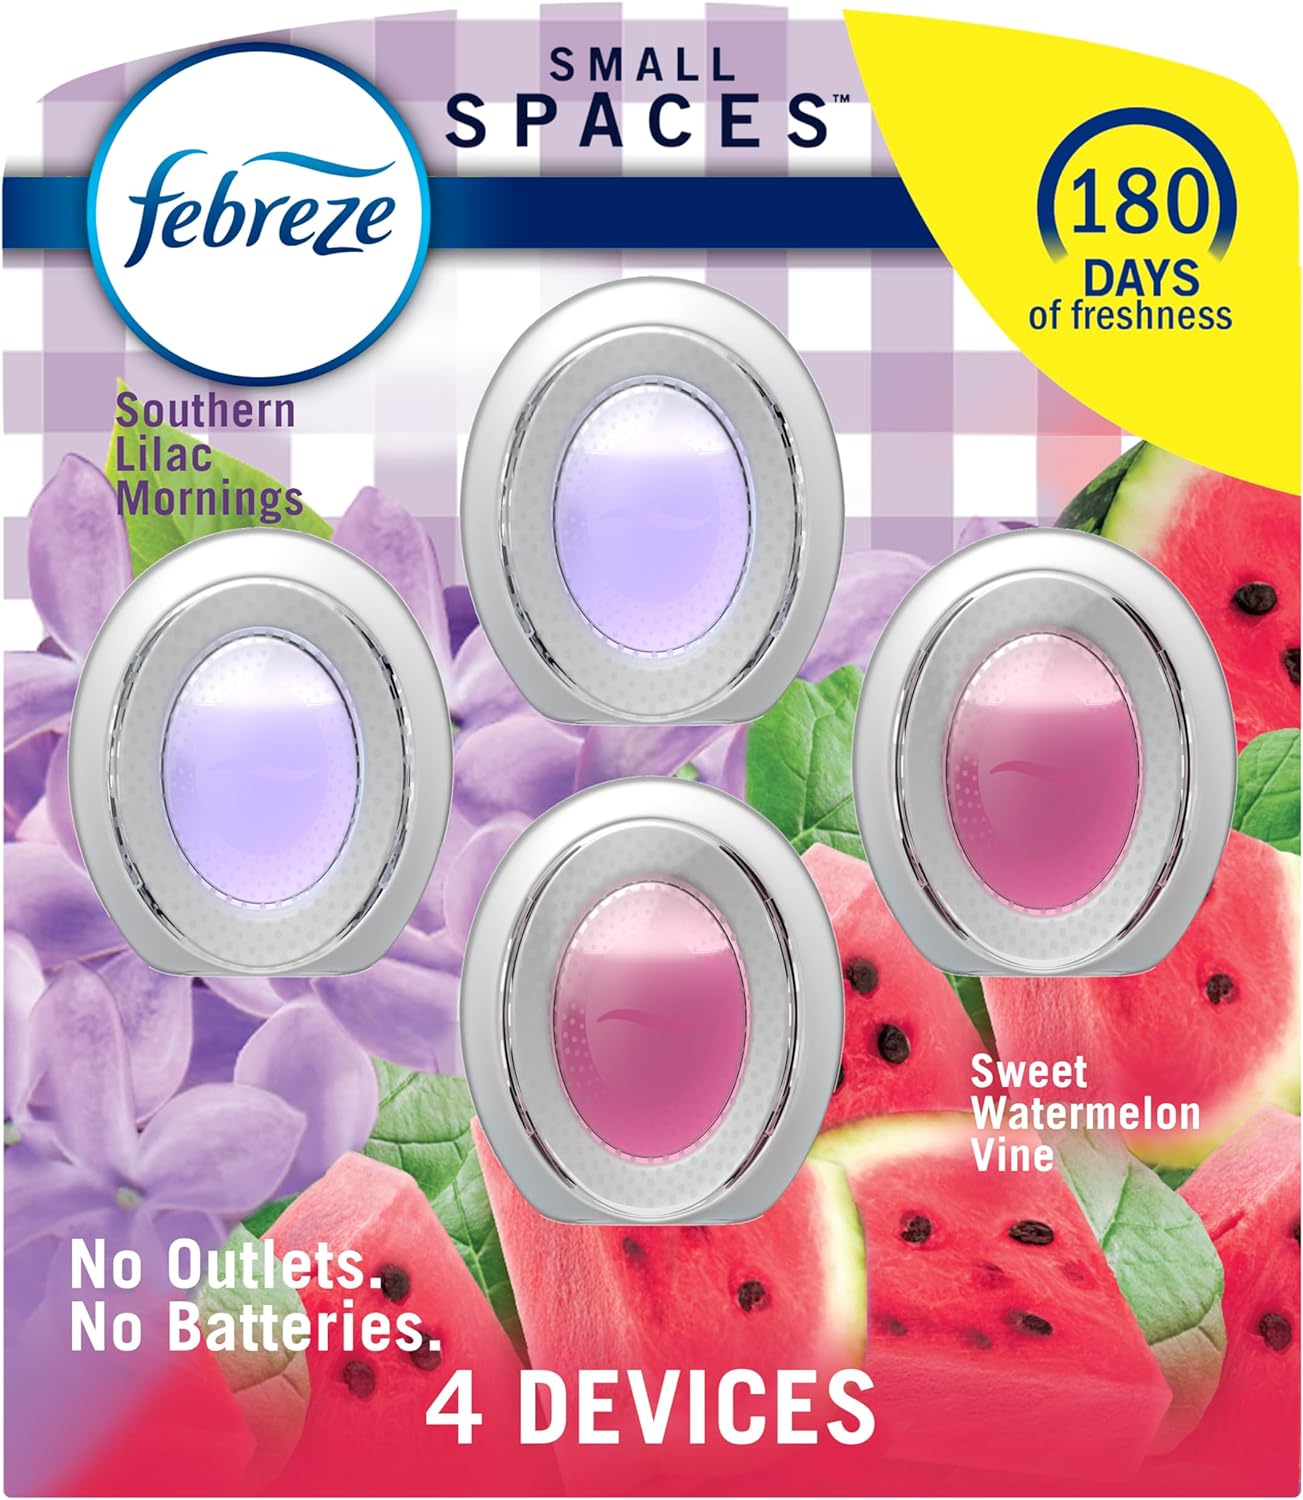 Febreze Small Spaces Air Freshener Sweet Watermelon Vine, Southern Lilac Mornings, Pack of 4 (2 of Each), 0.25 Oz Each